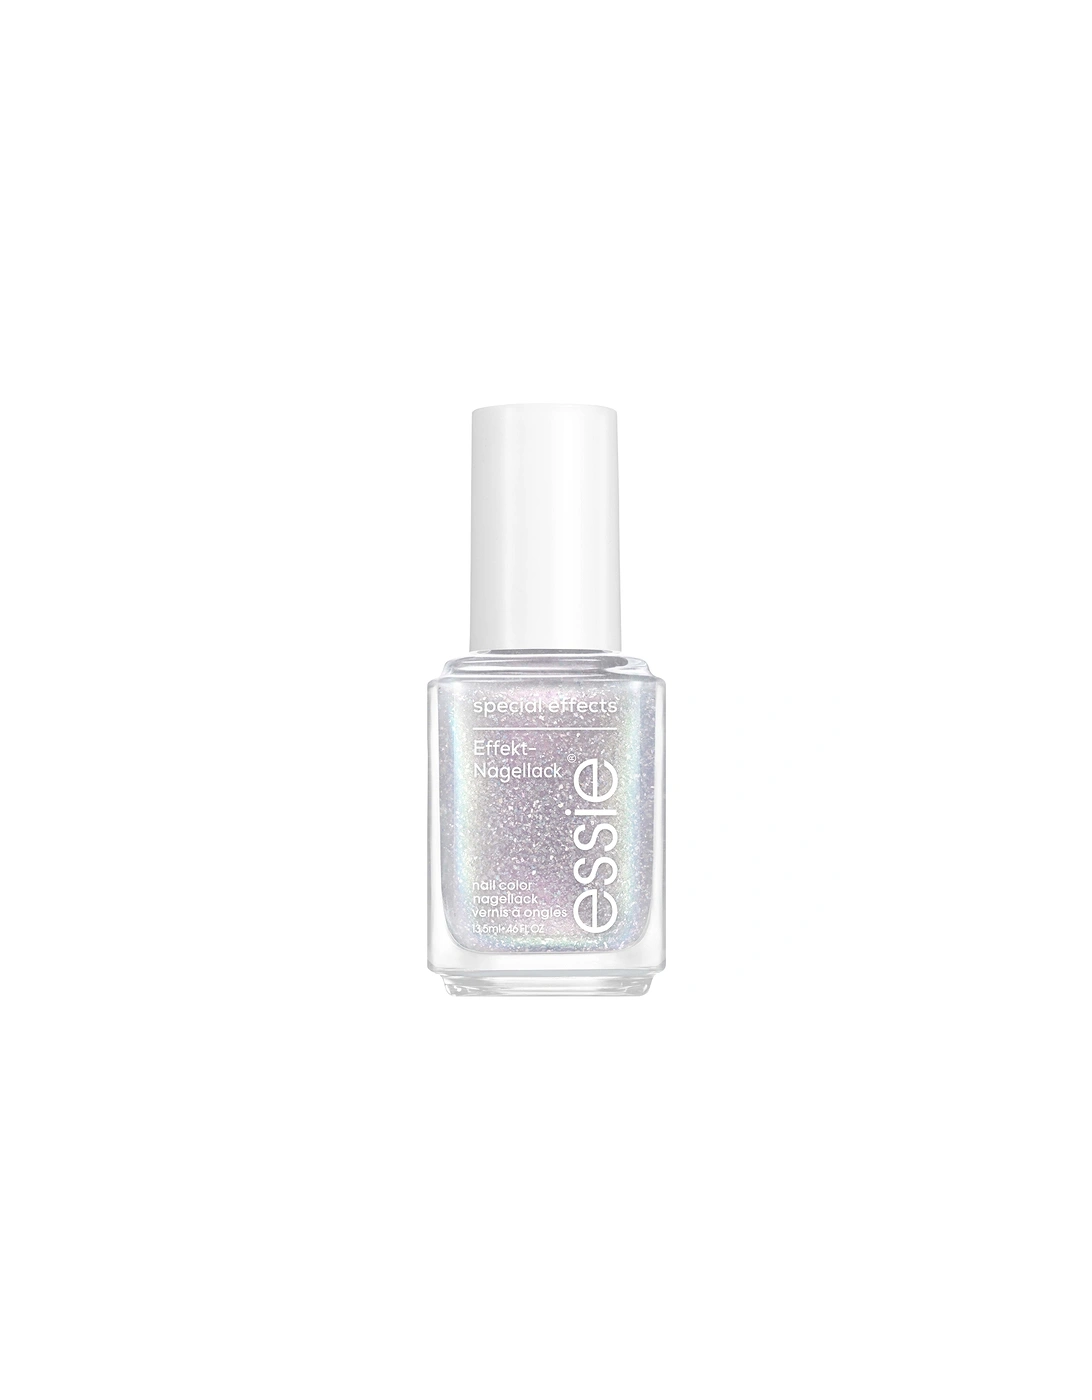 Original Nail Art Studio Special Effects Nail Polish Topcoat - Lustrous Luxury, 2 of 1